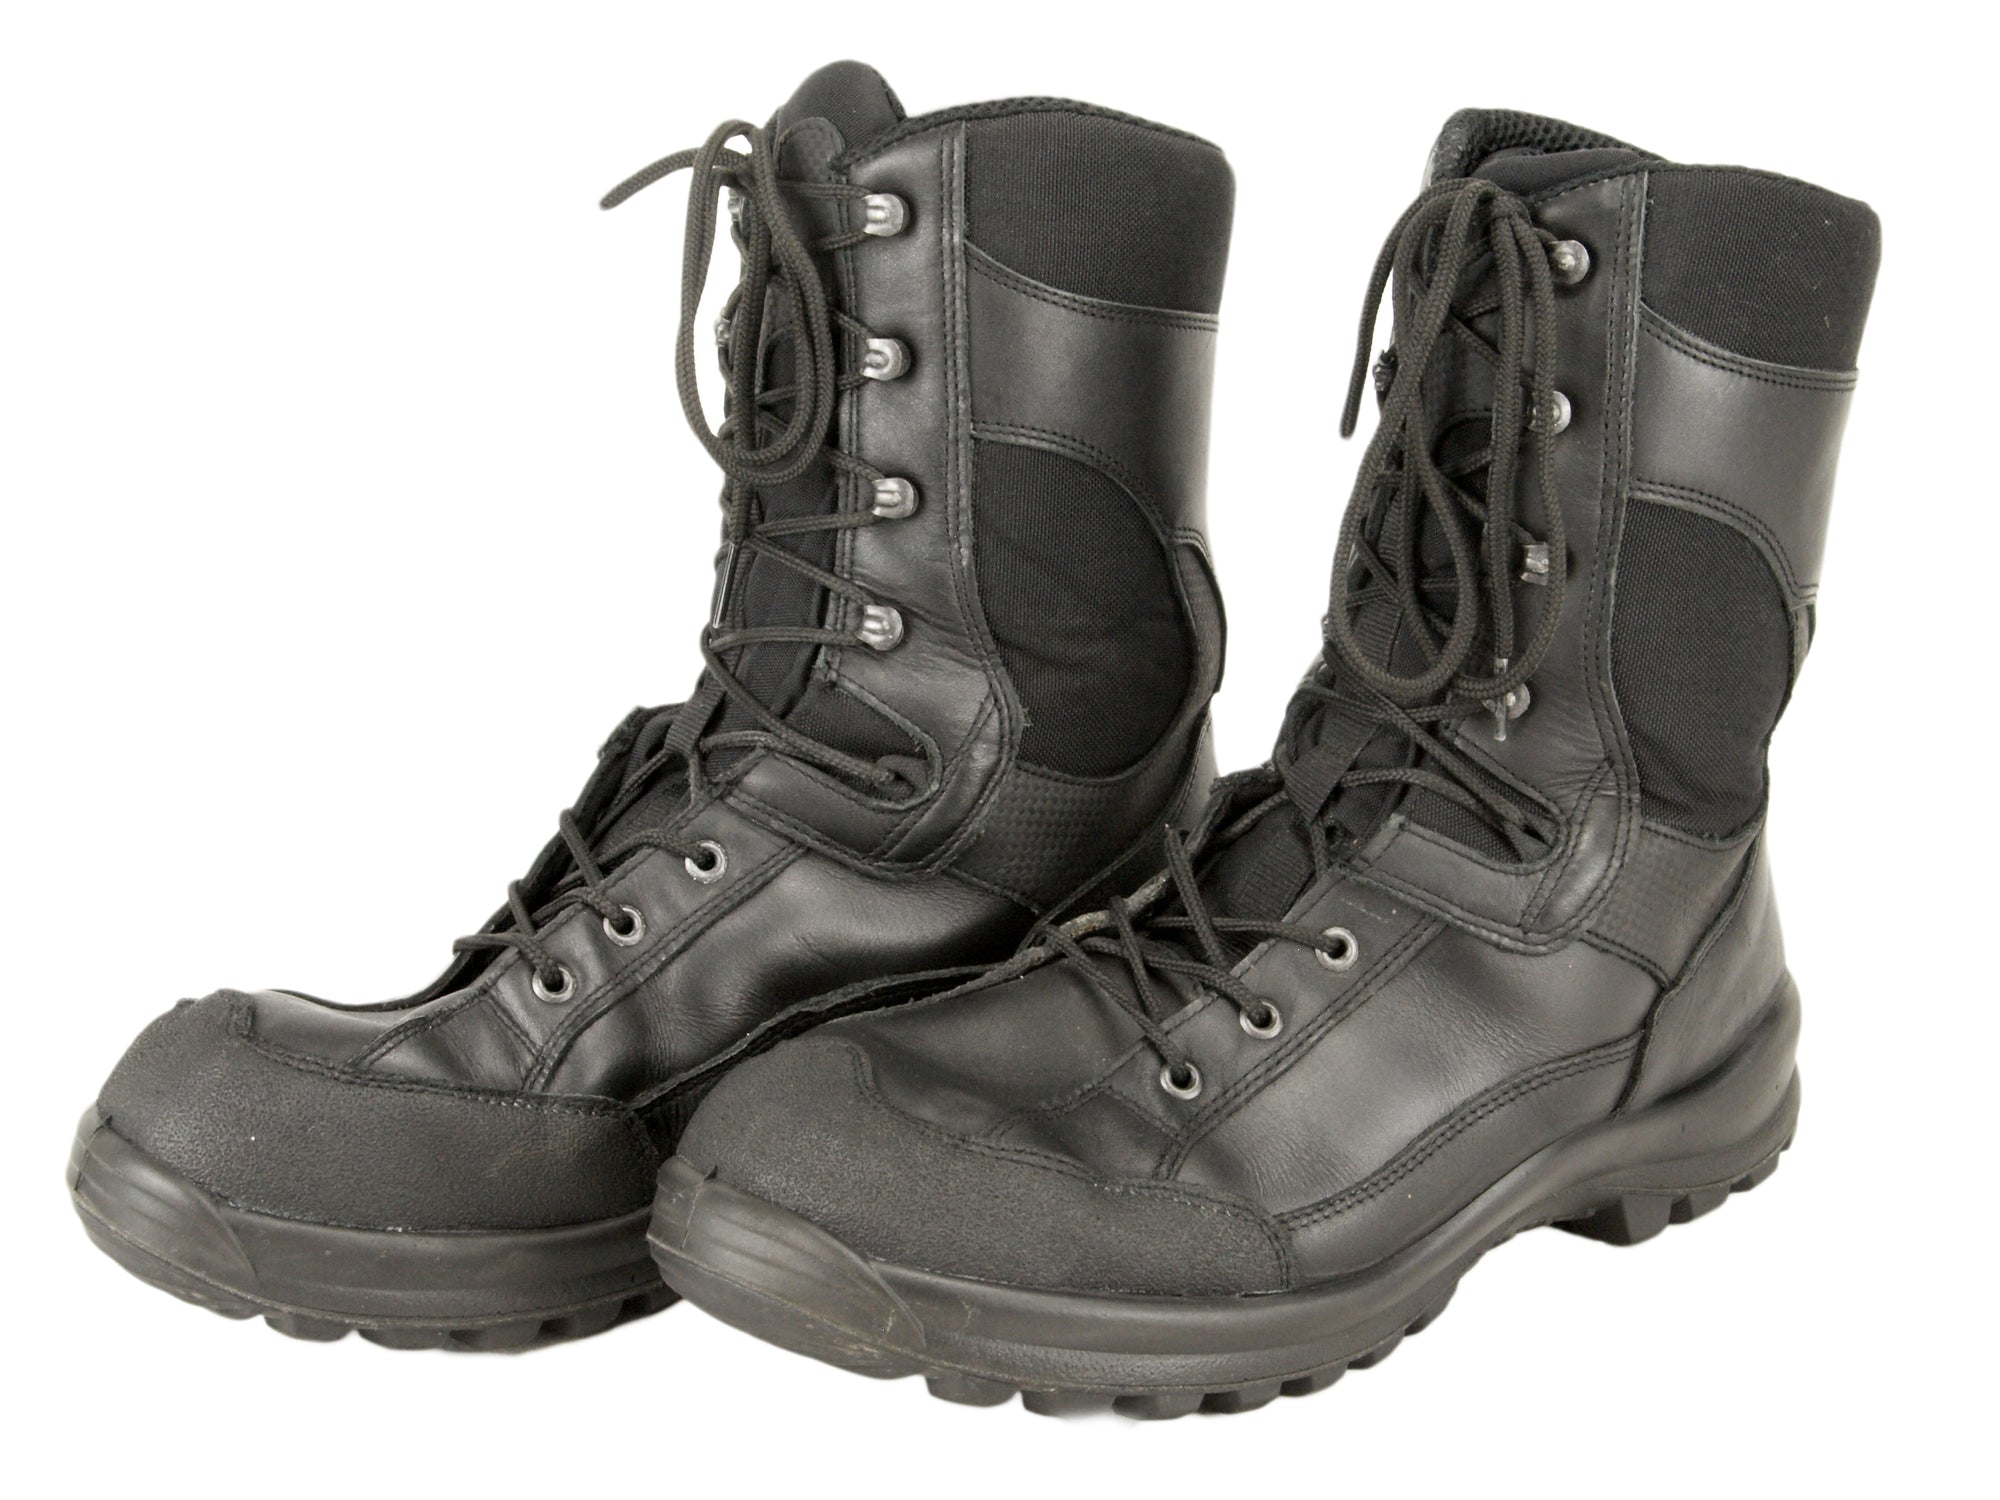 Austrian Army Lightweight Leather and Cordura Jungle Boots